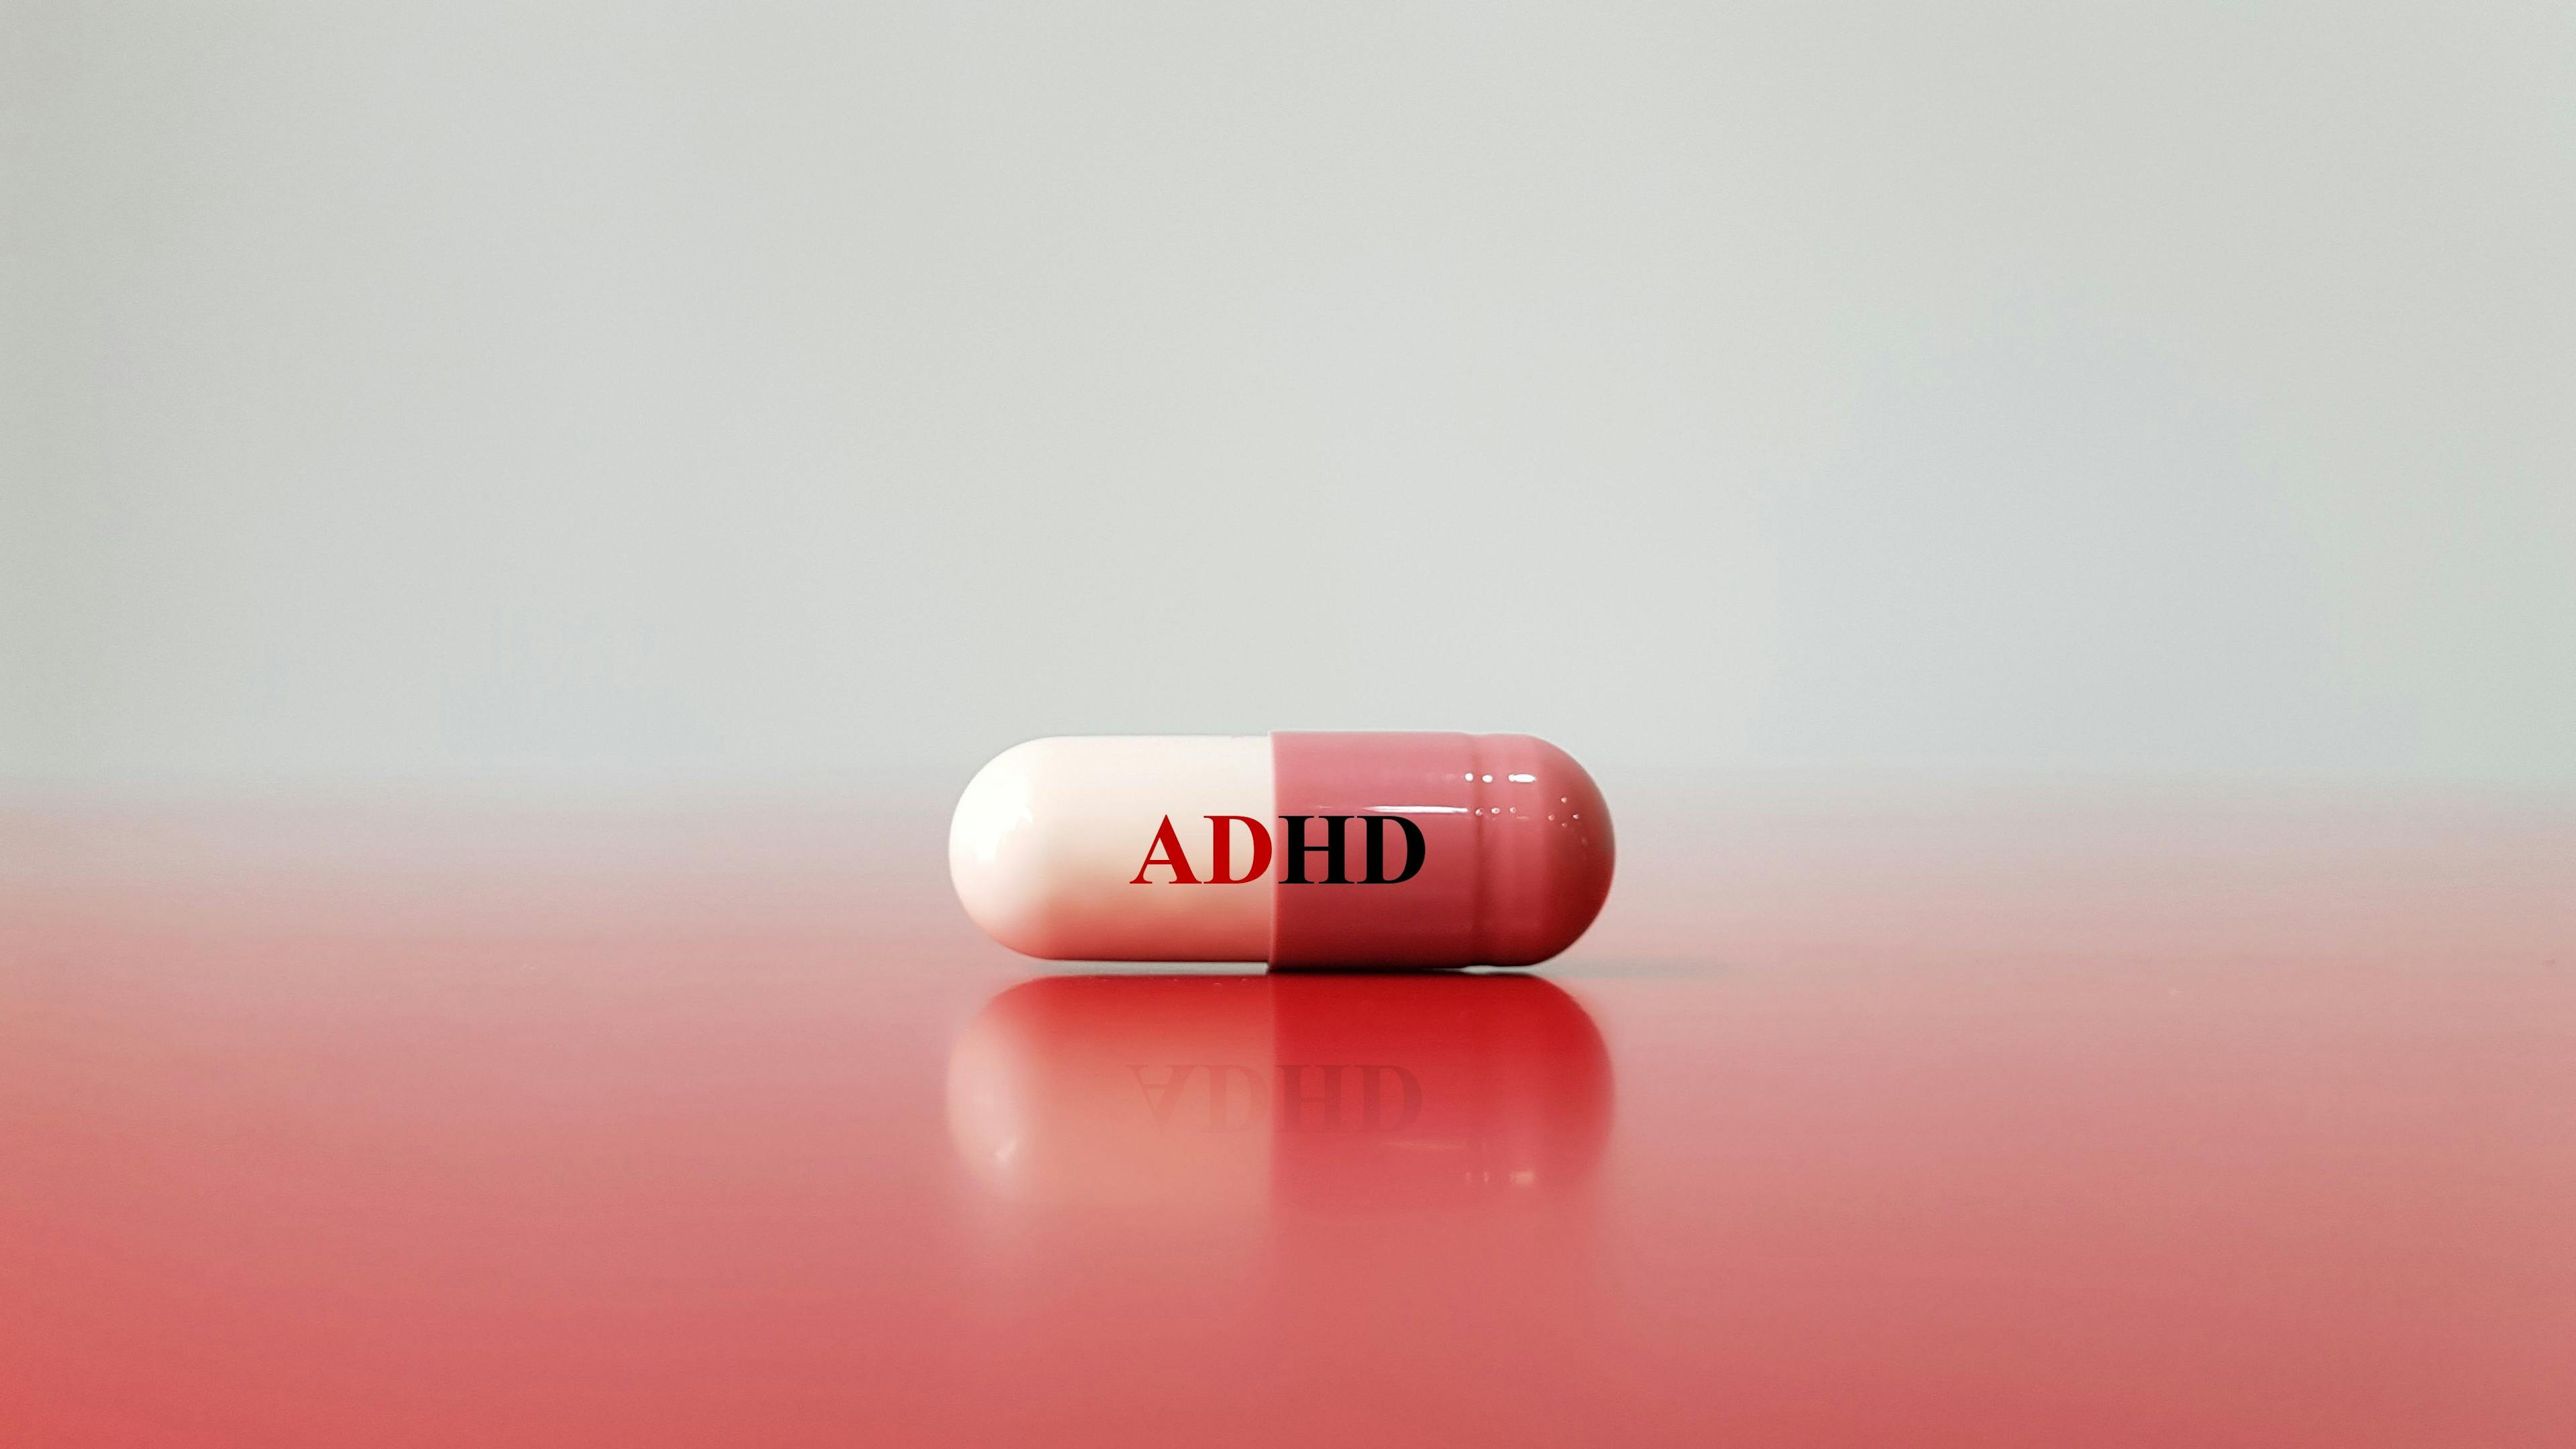 ADHD Medication Shortages Raise Concerns Among Young Patients and Their Families